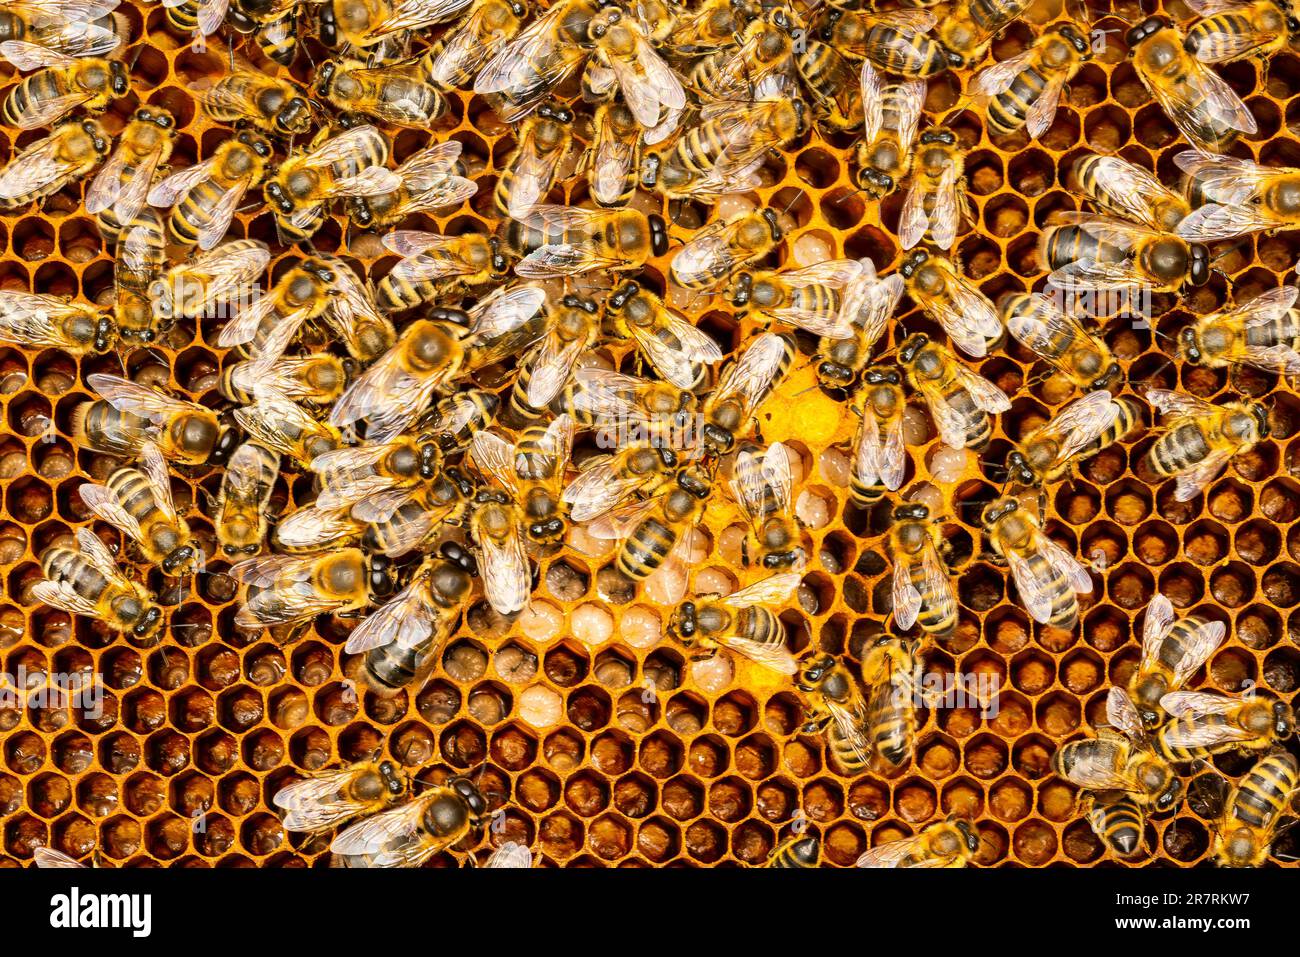 Bee on honeycombs with honey slices nectar into cells. Abstract hexagon structure is honeycomb from bee hive filled with golden honey Stock Photo